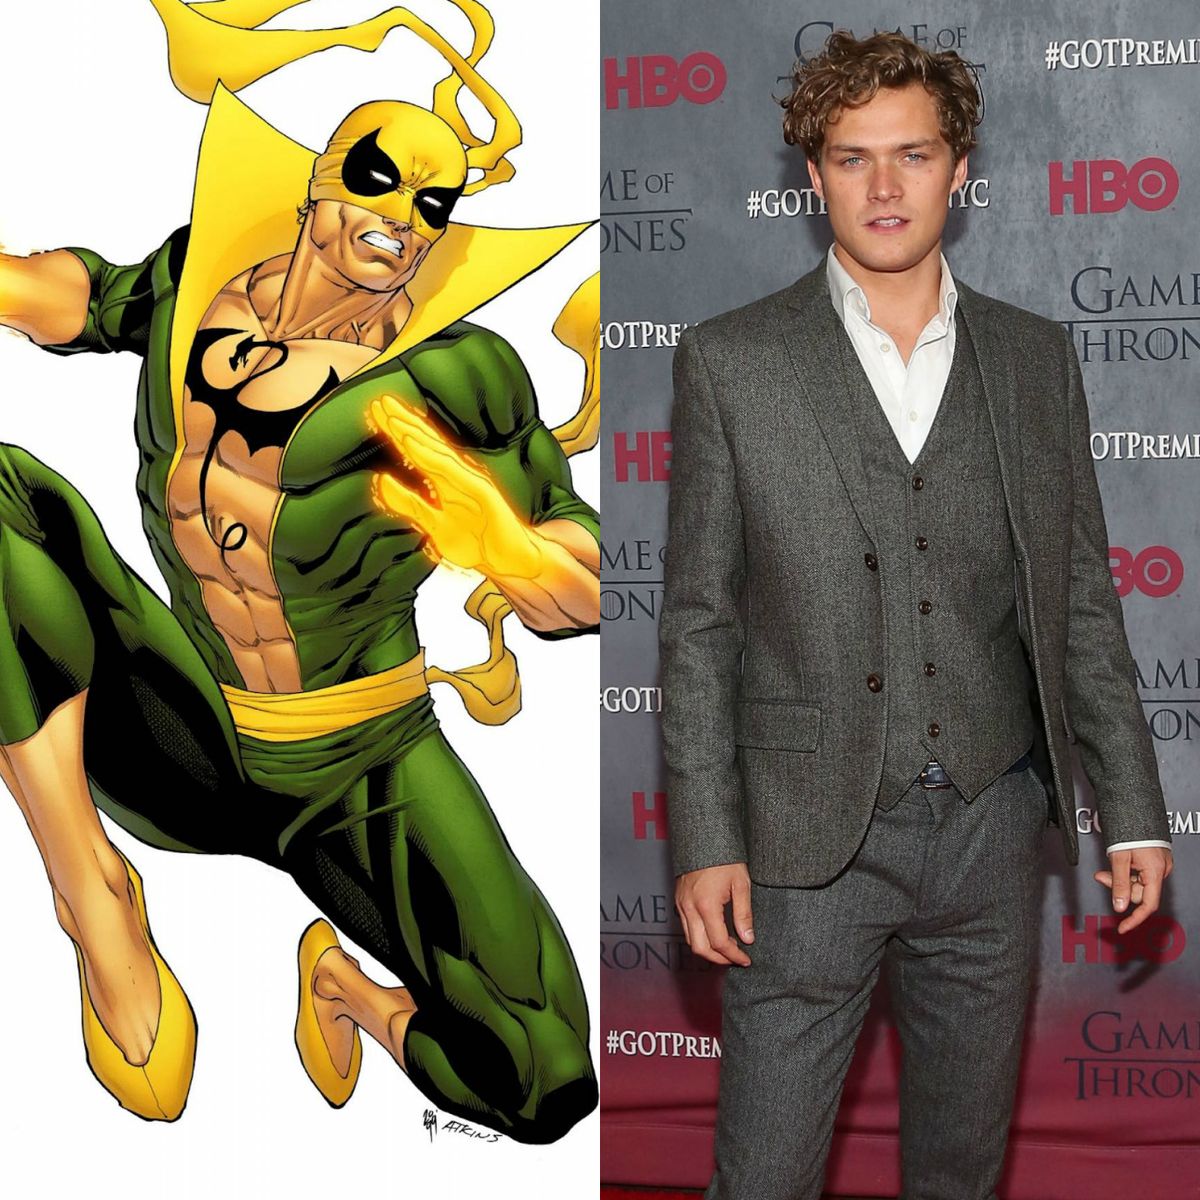 Iron Fist' Is Adding Another Marvel Martial Artist To The Cast